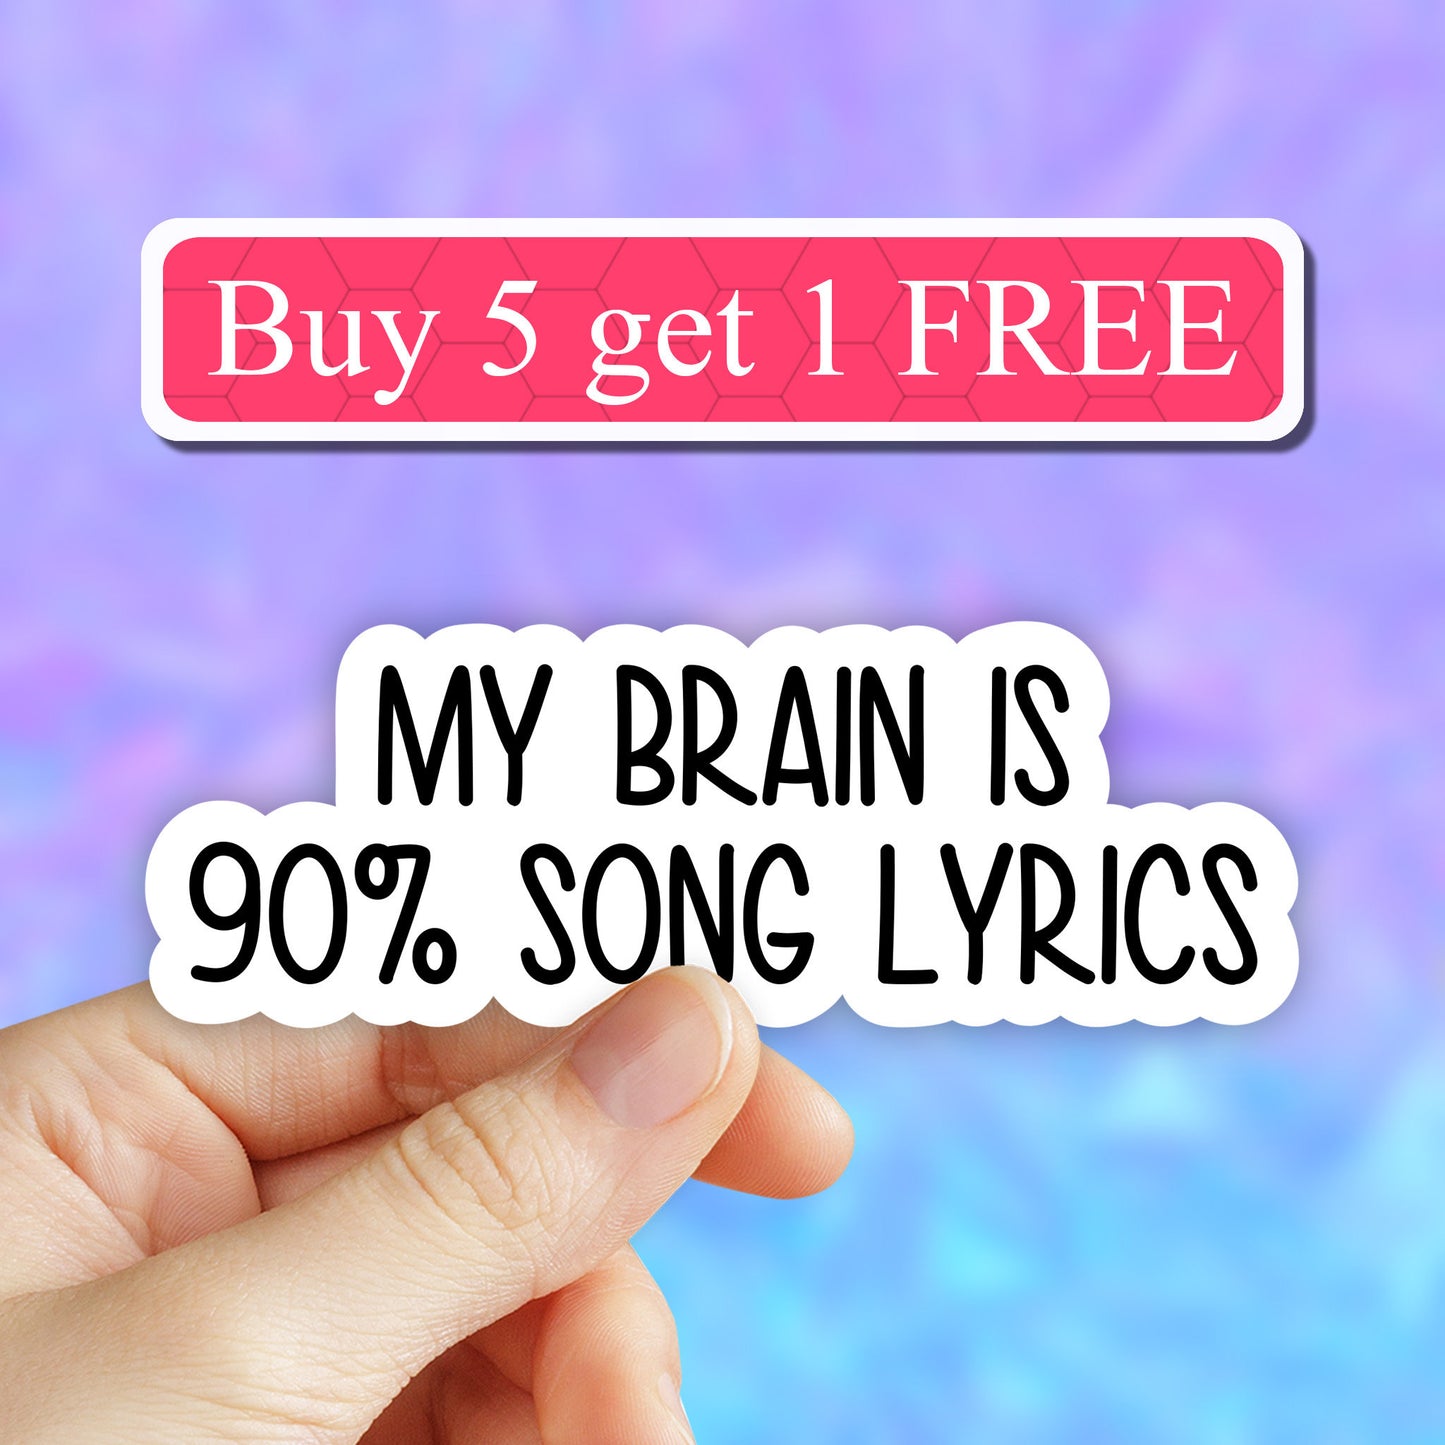 My brain is like ninety percent song lyrics sticker, funny music stickers, laptop decals, song lyrics stickers, music lover  laptop stickers